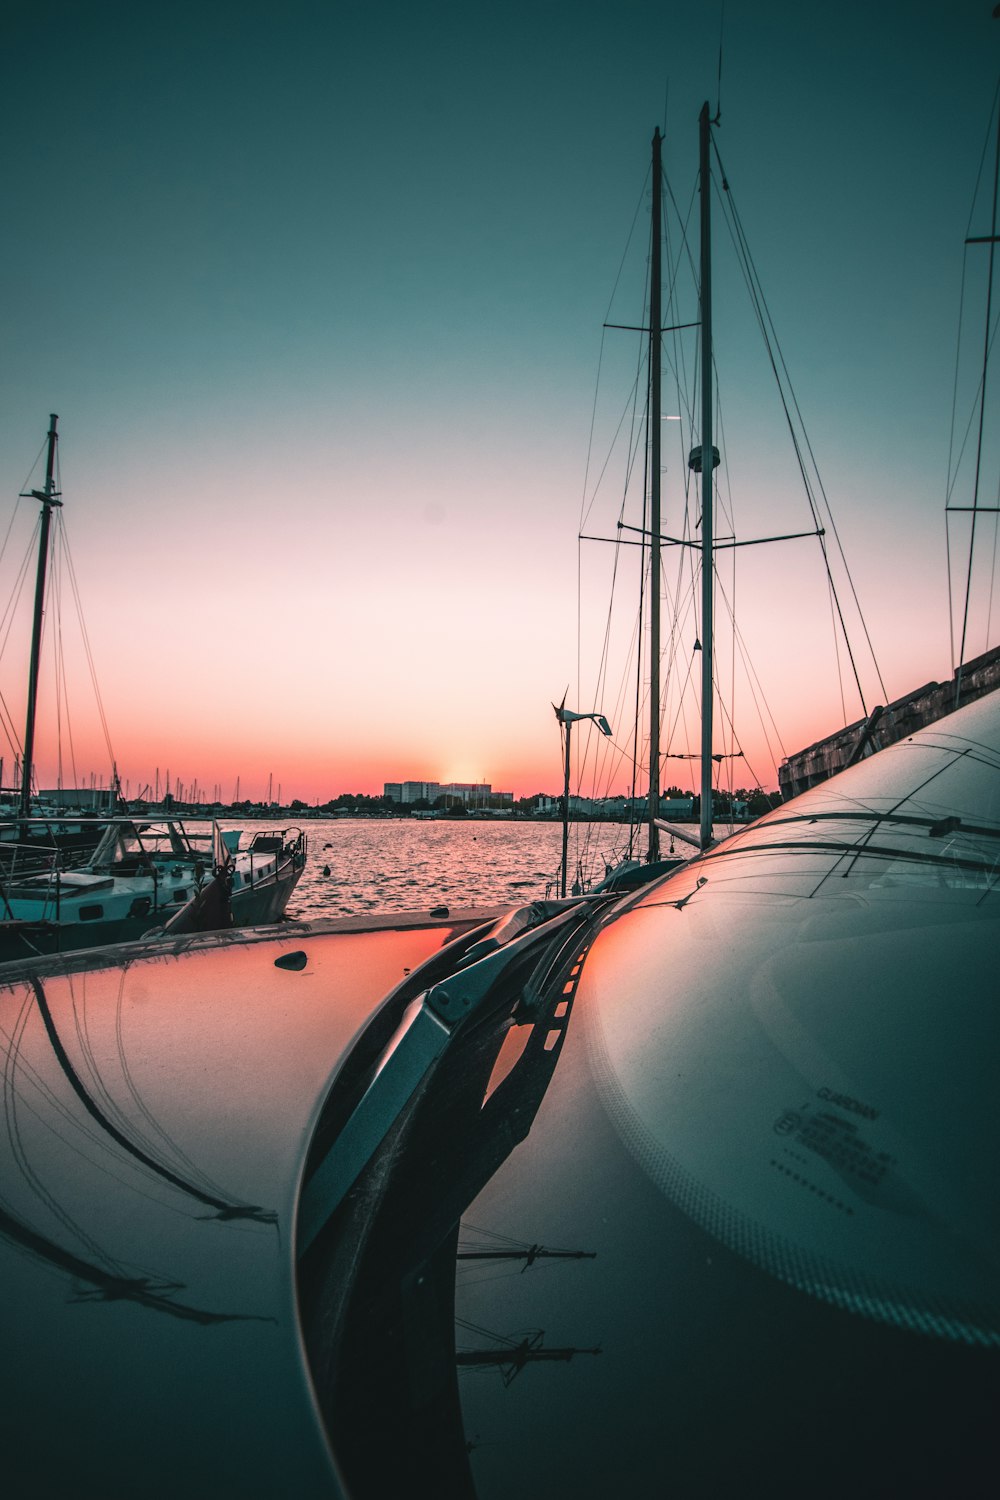 a group of sailboats docked in a harbor at sunset